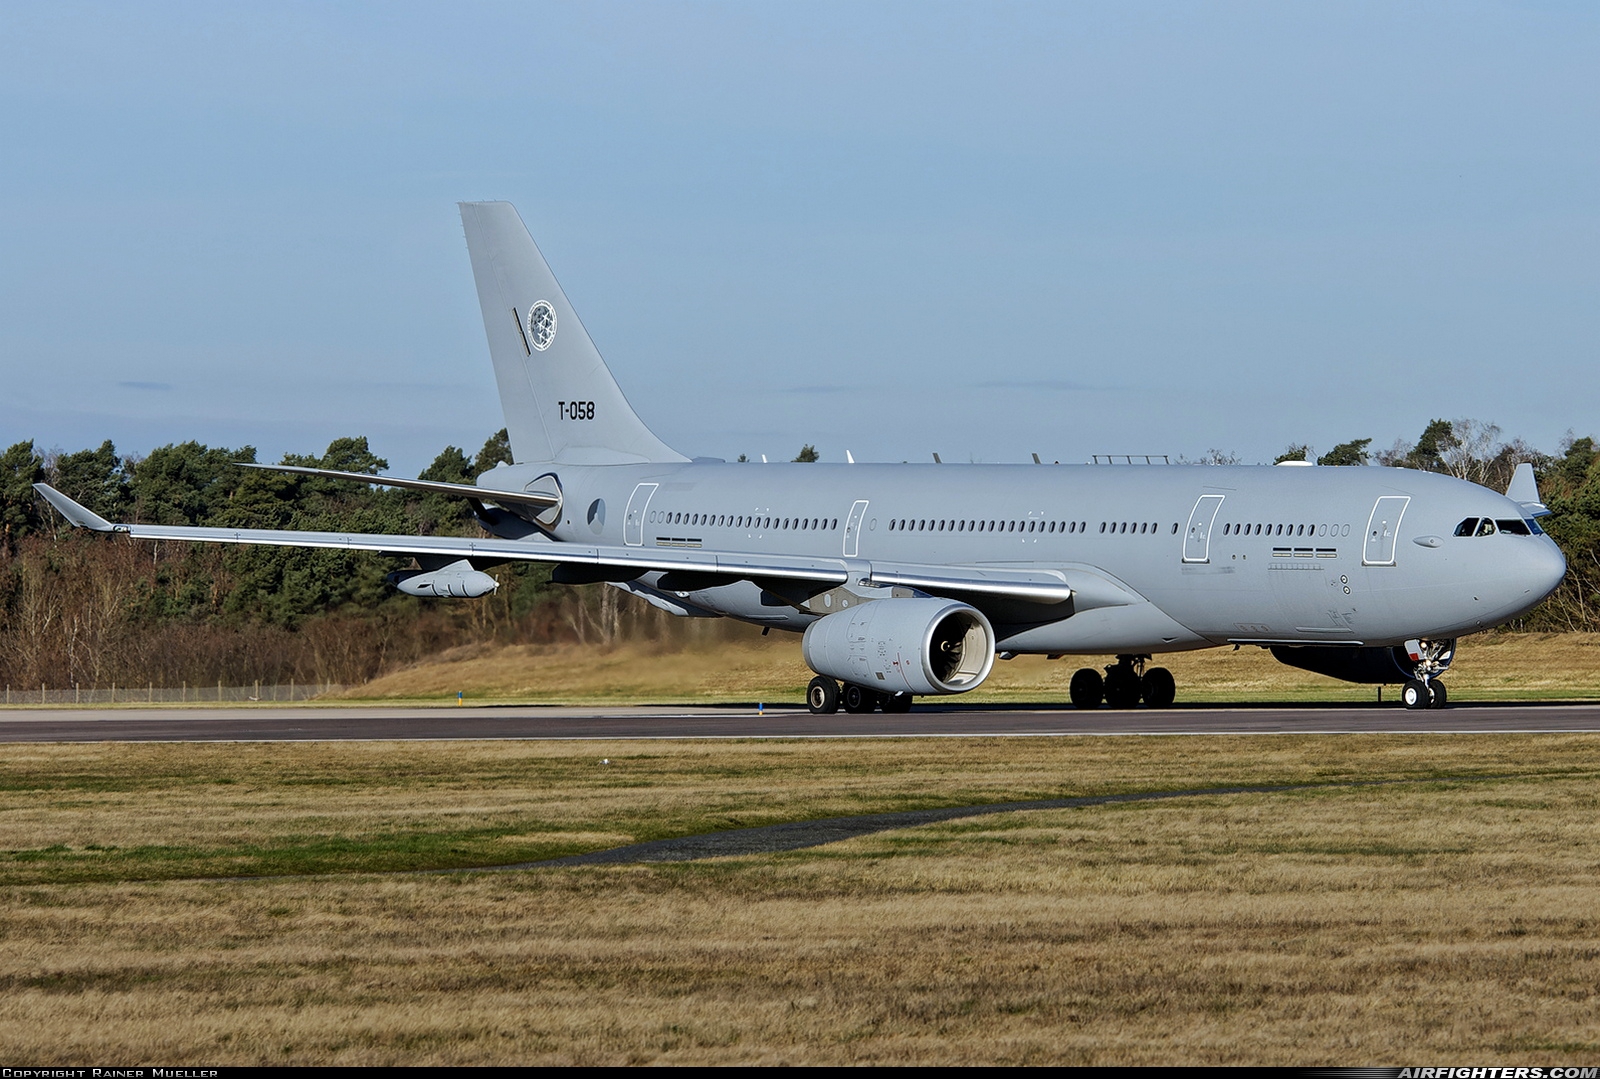 Netherlands - Air Force Airbus KC-30M (A330-243MRTT) T-058 at Wunstorf (ETNW), Germany